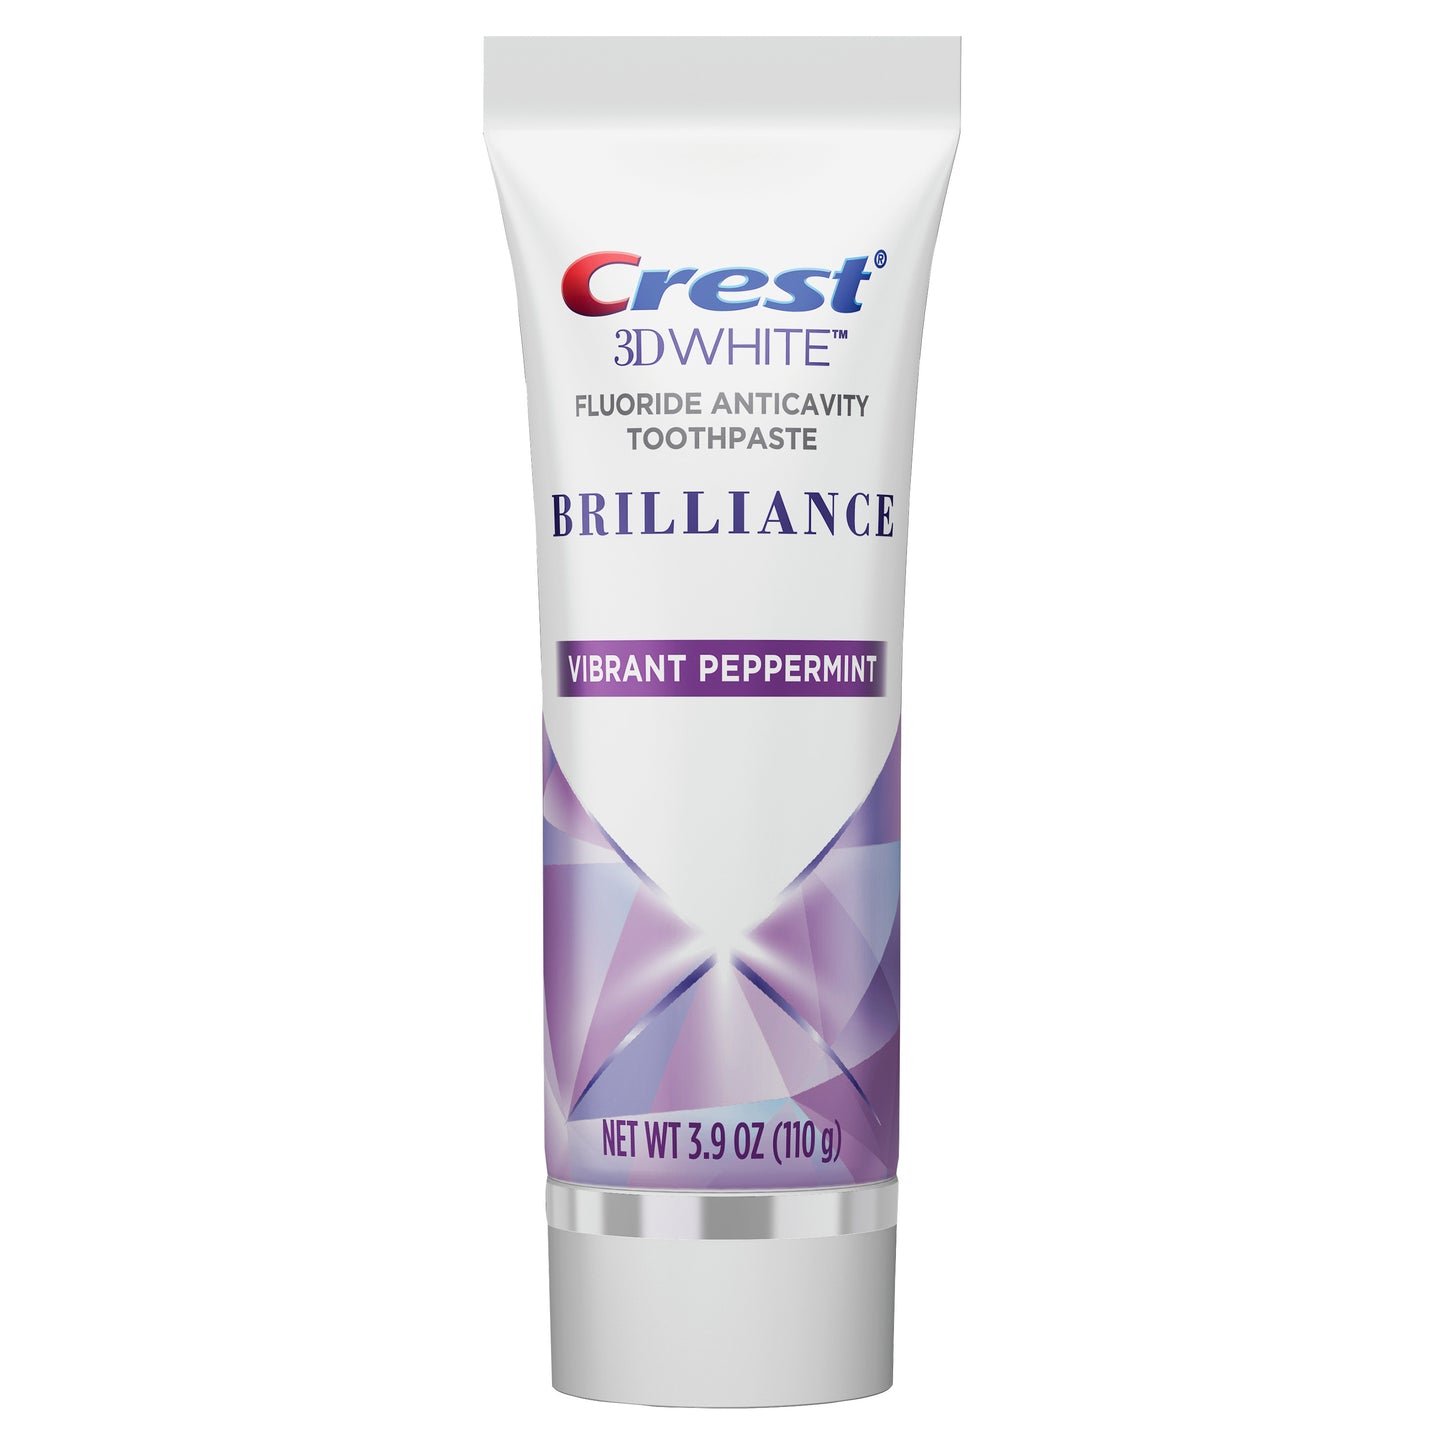 Crest 3D White Brilliance Vibrant Peppermint Toothpaste, 3.9 oz. / 110 g (Pack of 2)